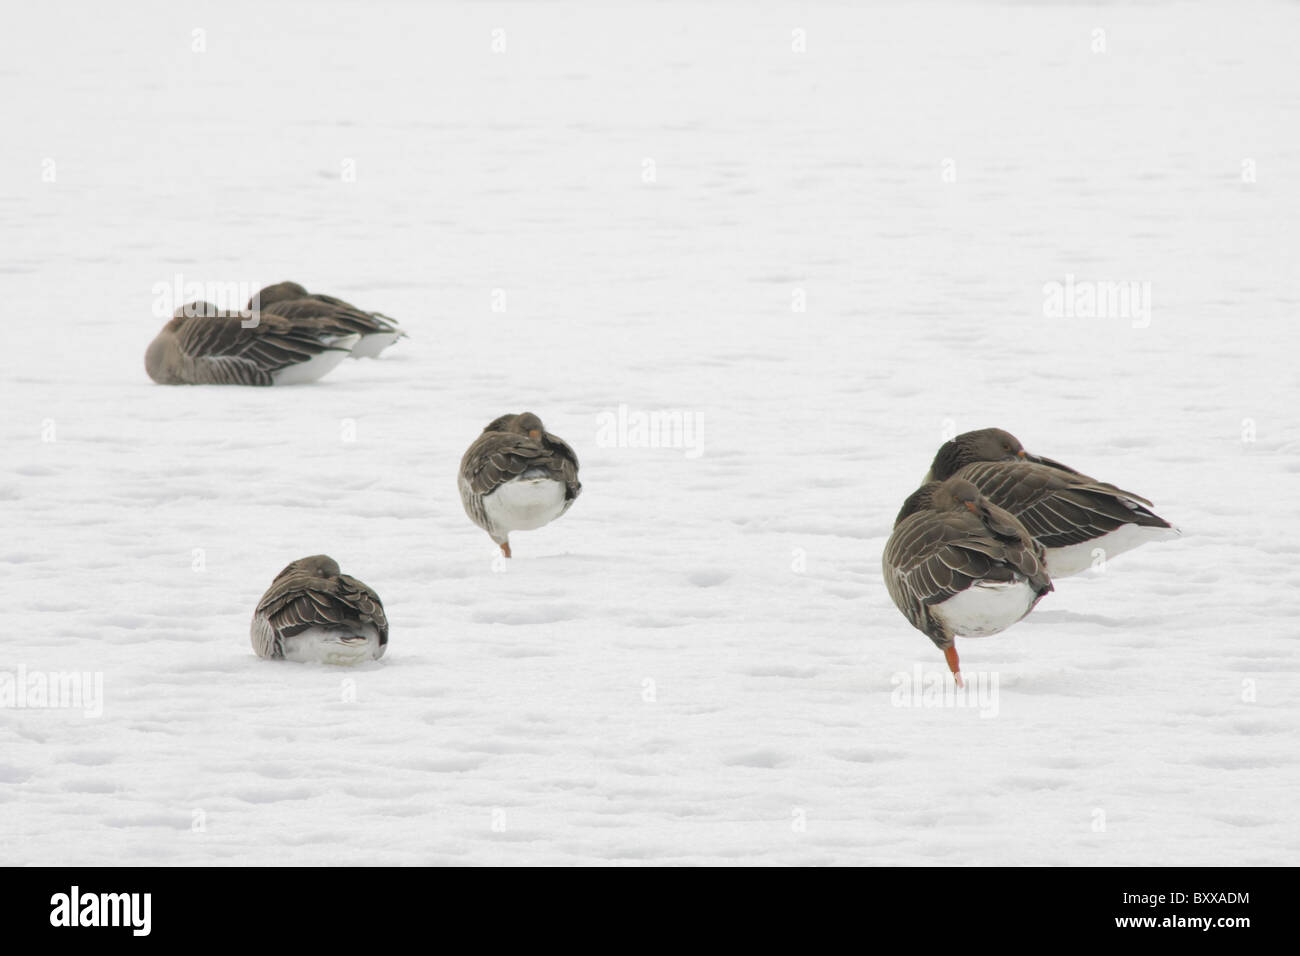 Greylag geese (Anser anser) resting in the snow, The Hague, Netherlands Stock Photo